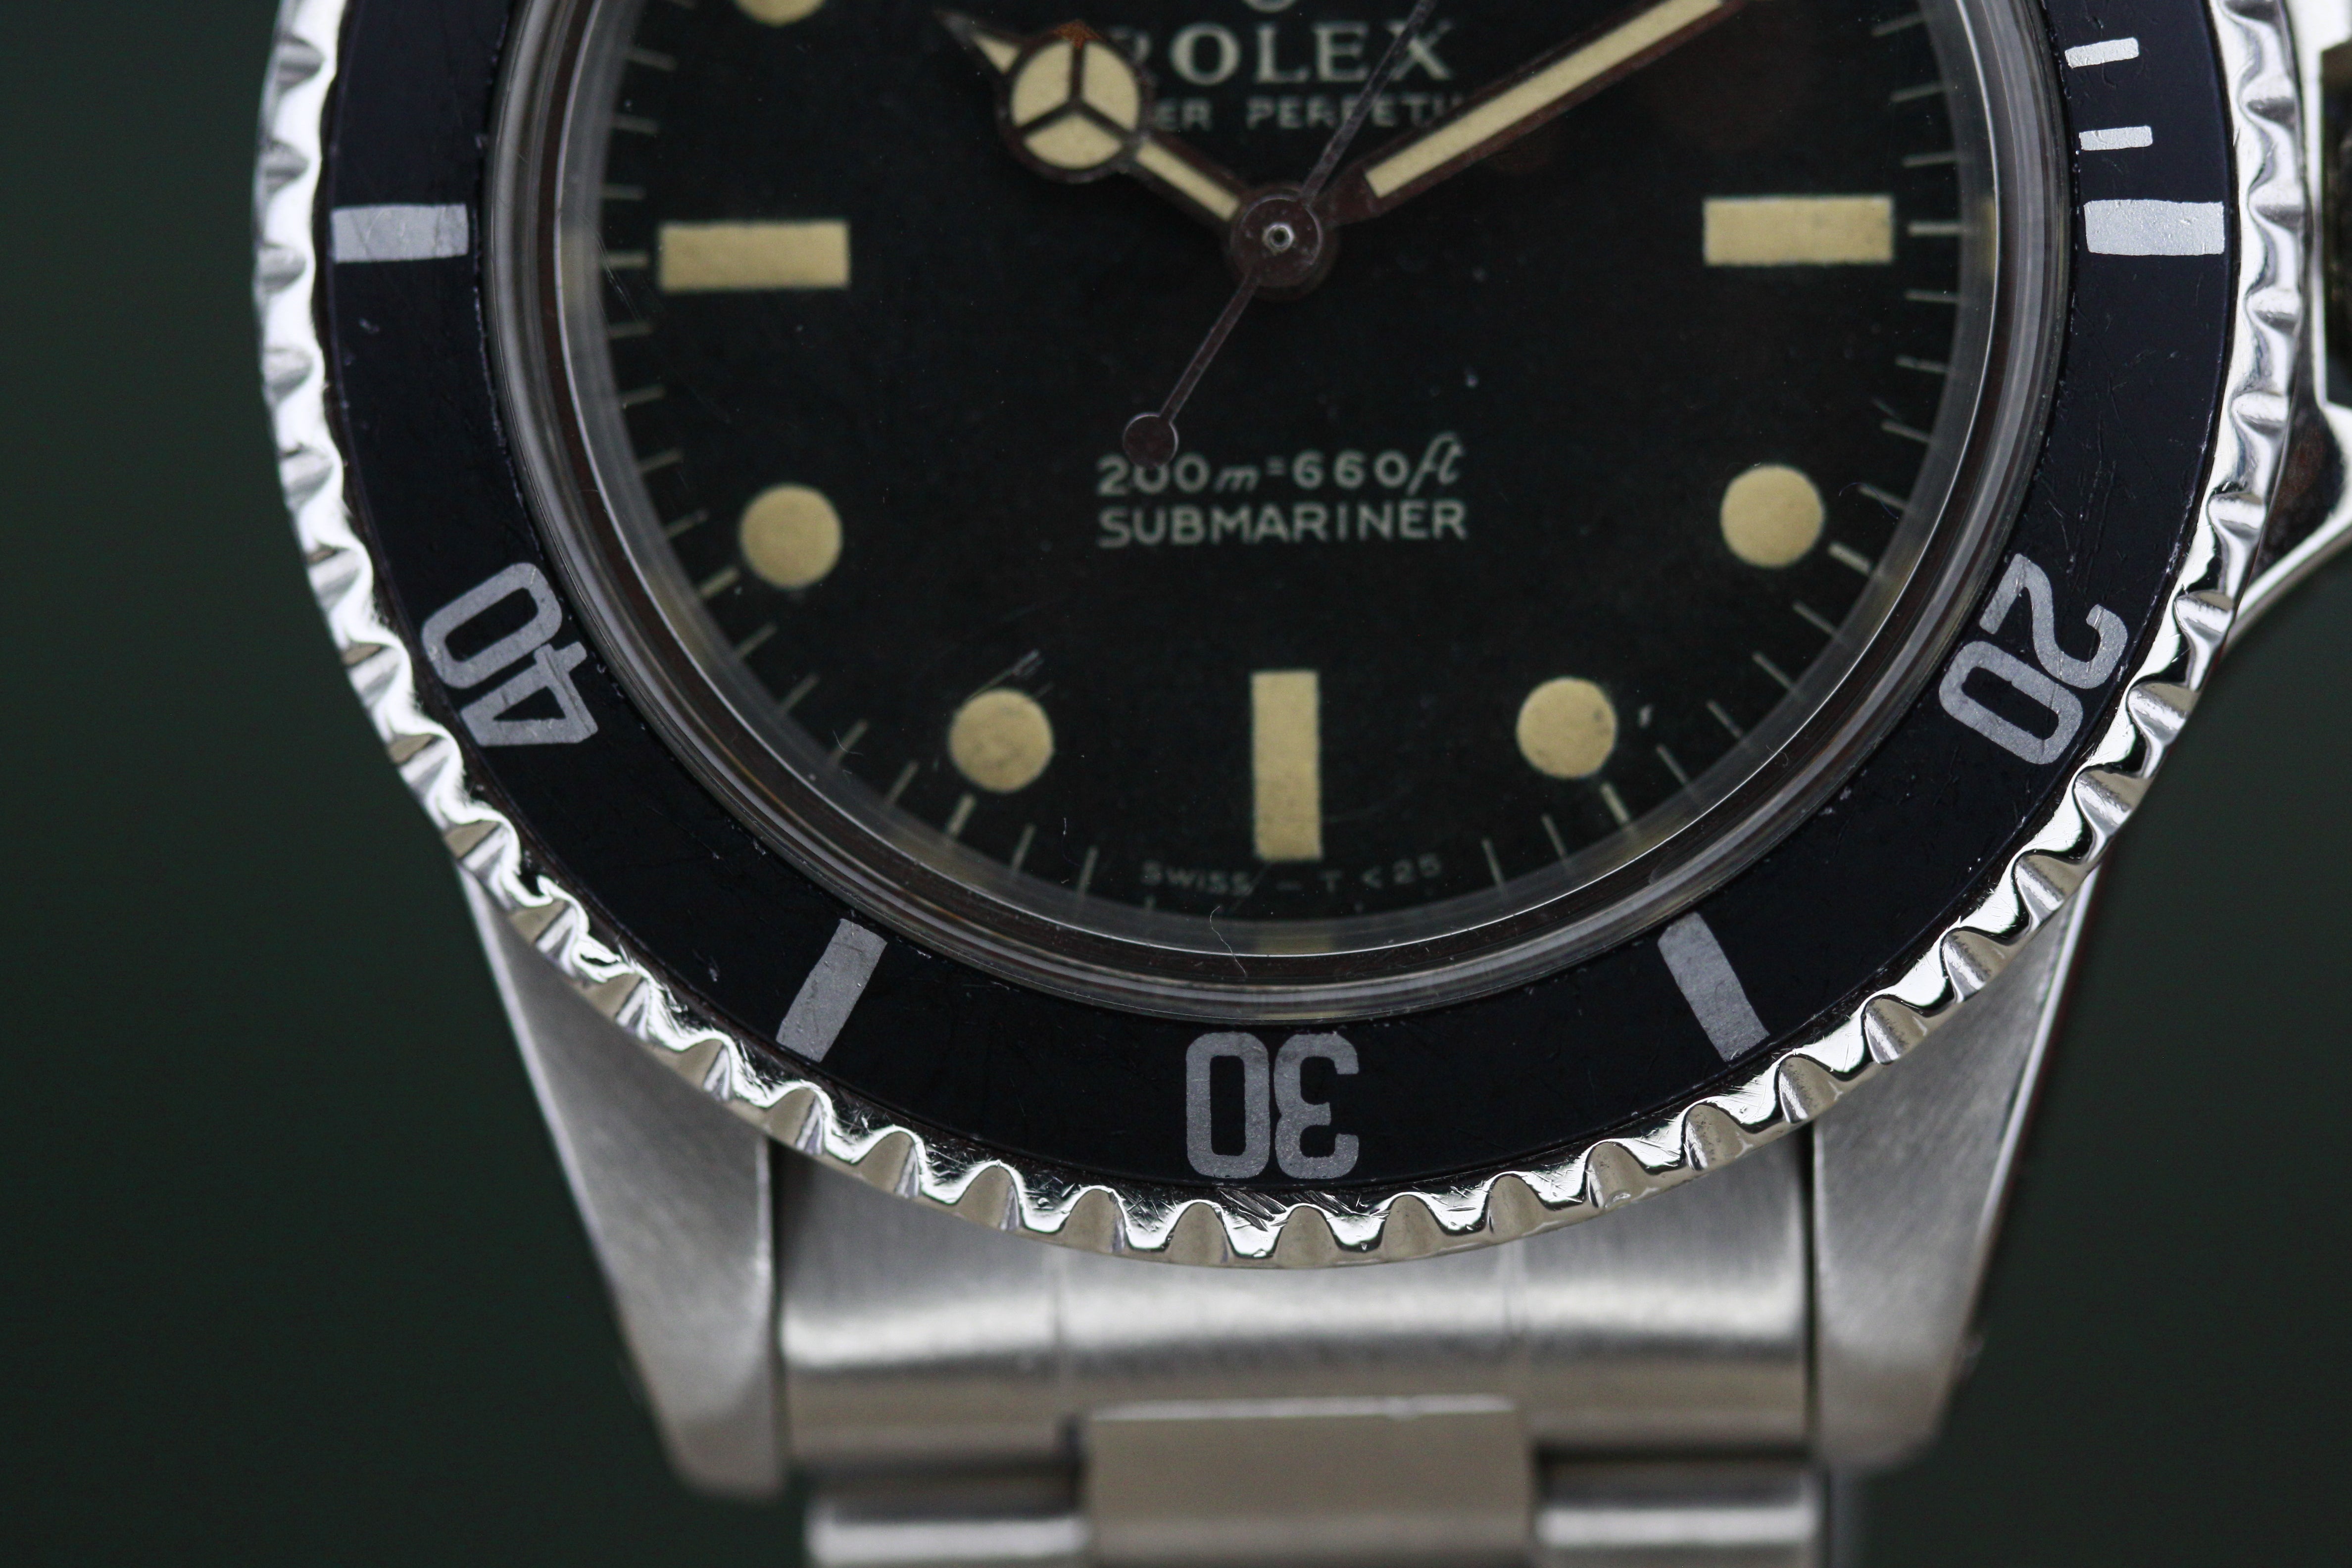 Rolex Oyster Perpetual Submariner Ref.5513 Transition Gilt to meters first MK1 ca.1965-66